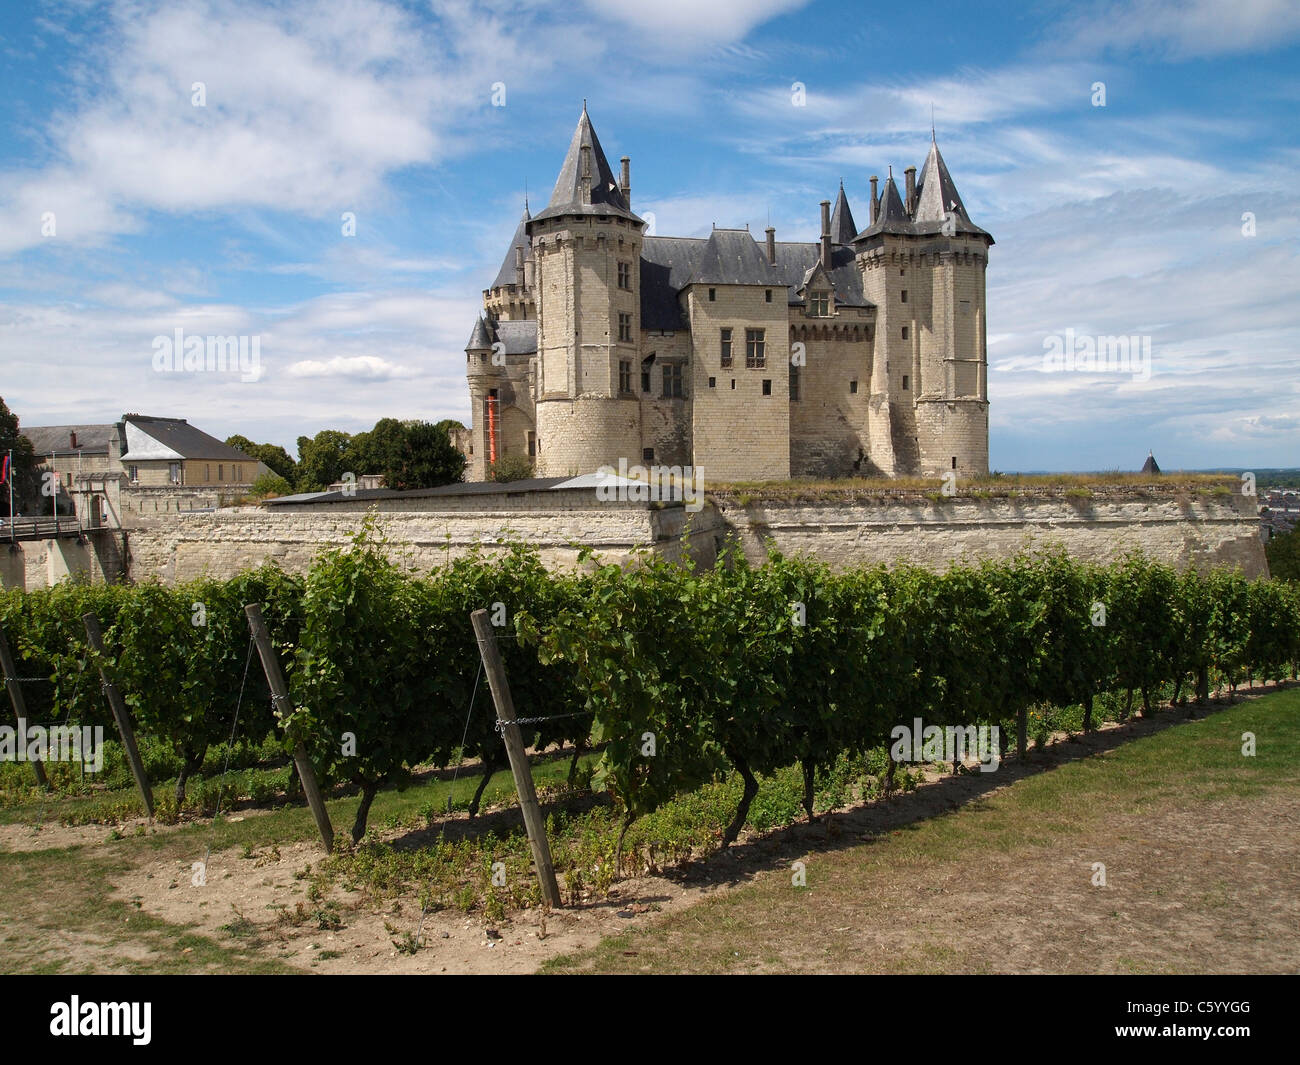 The Chateau de Saumur castle with grapes growing in the foreground. Loire valley, France Stock Photo